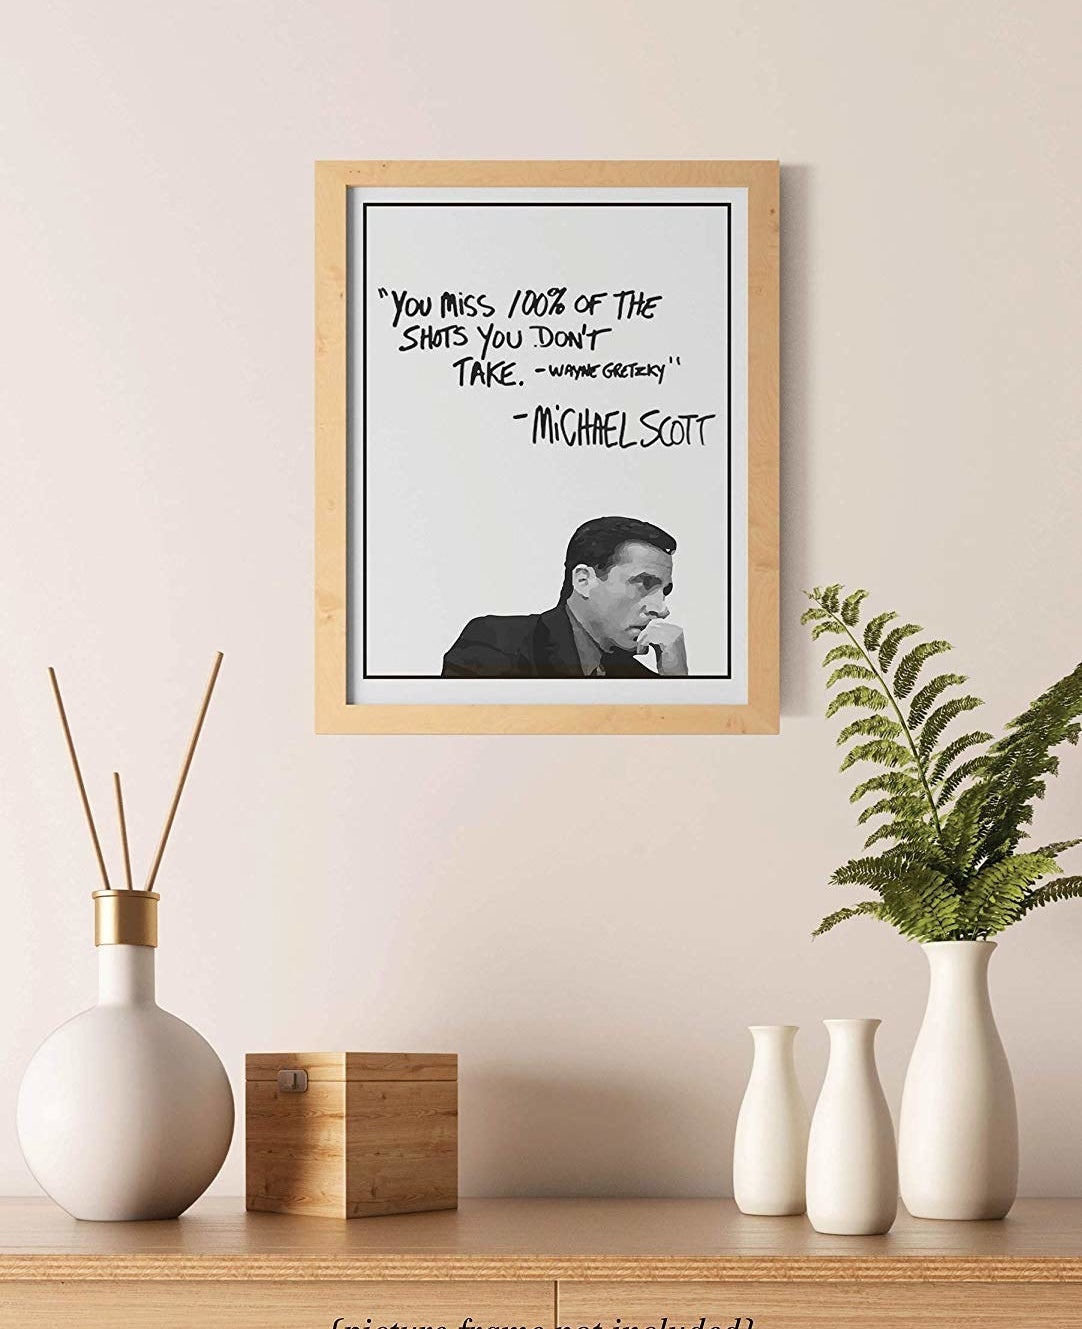 Michael Scott print with a quote from &quot;The Office&quot;